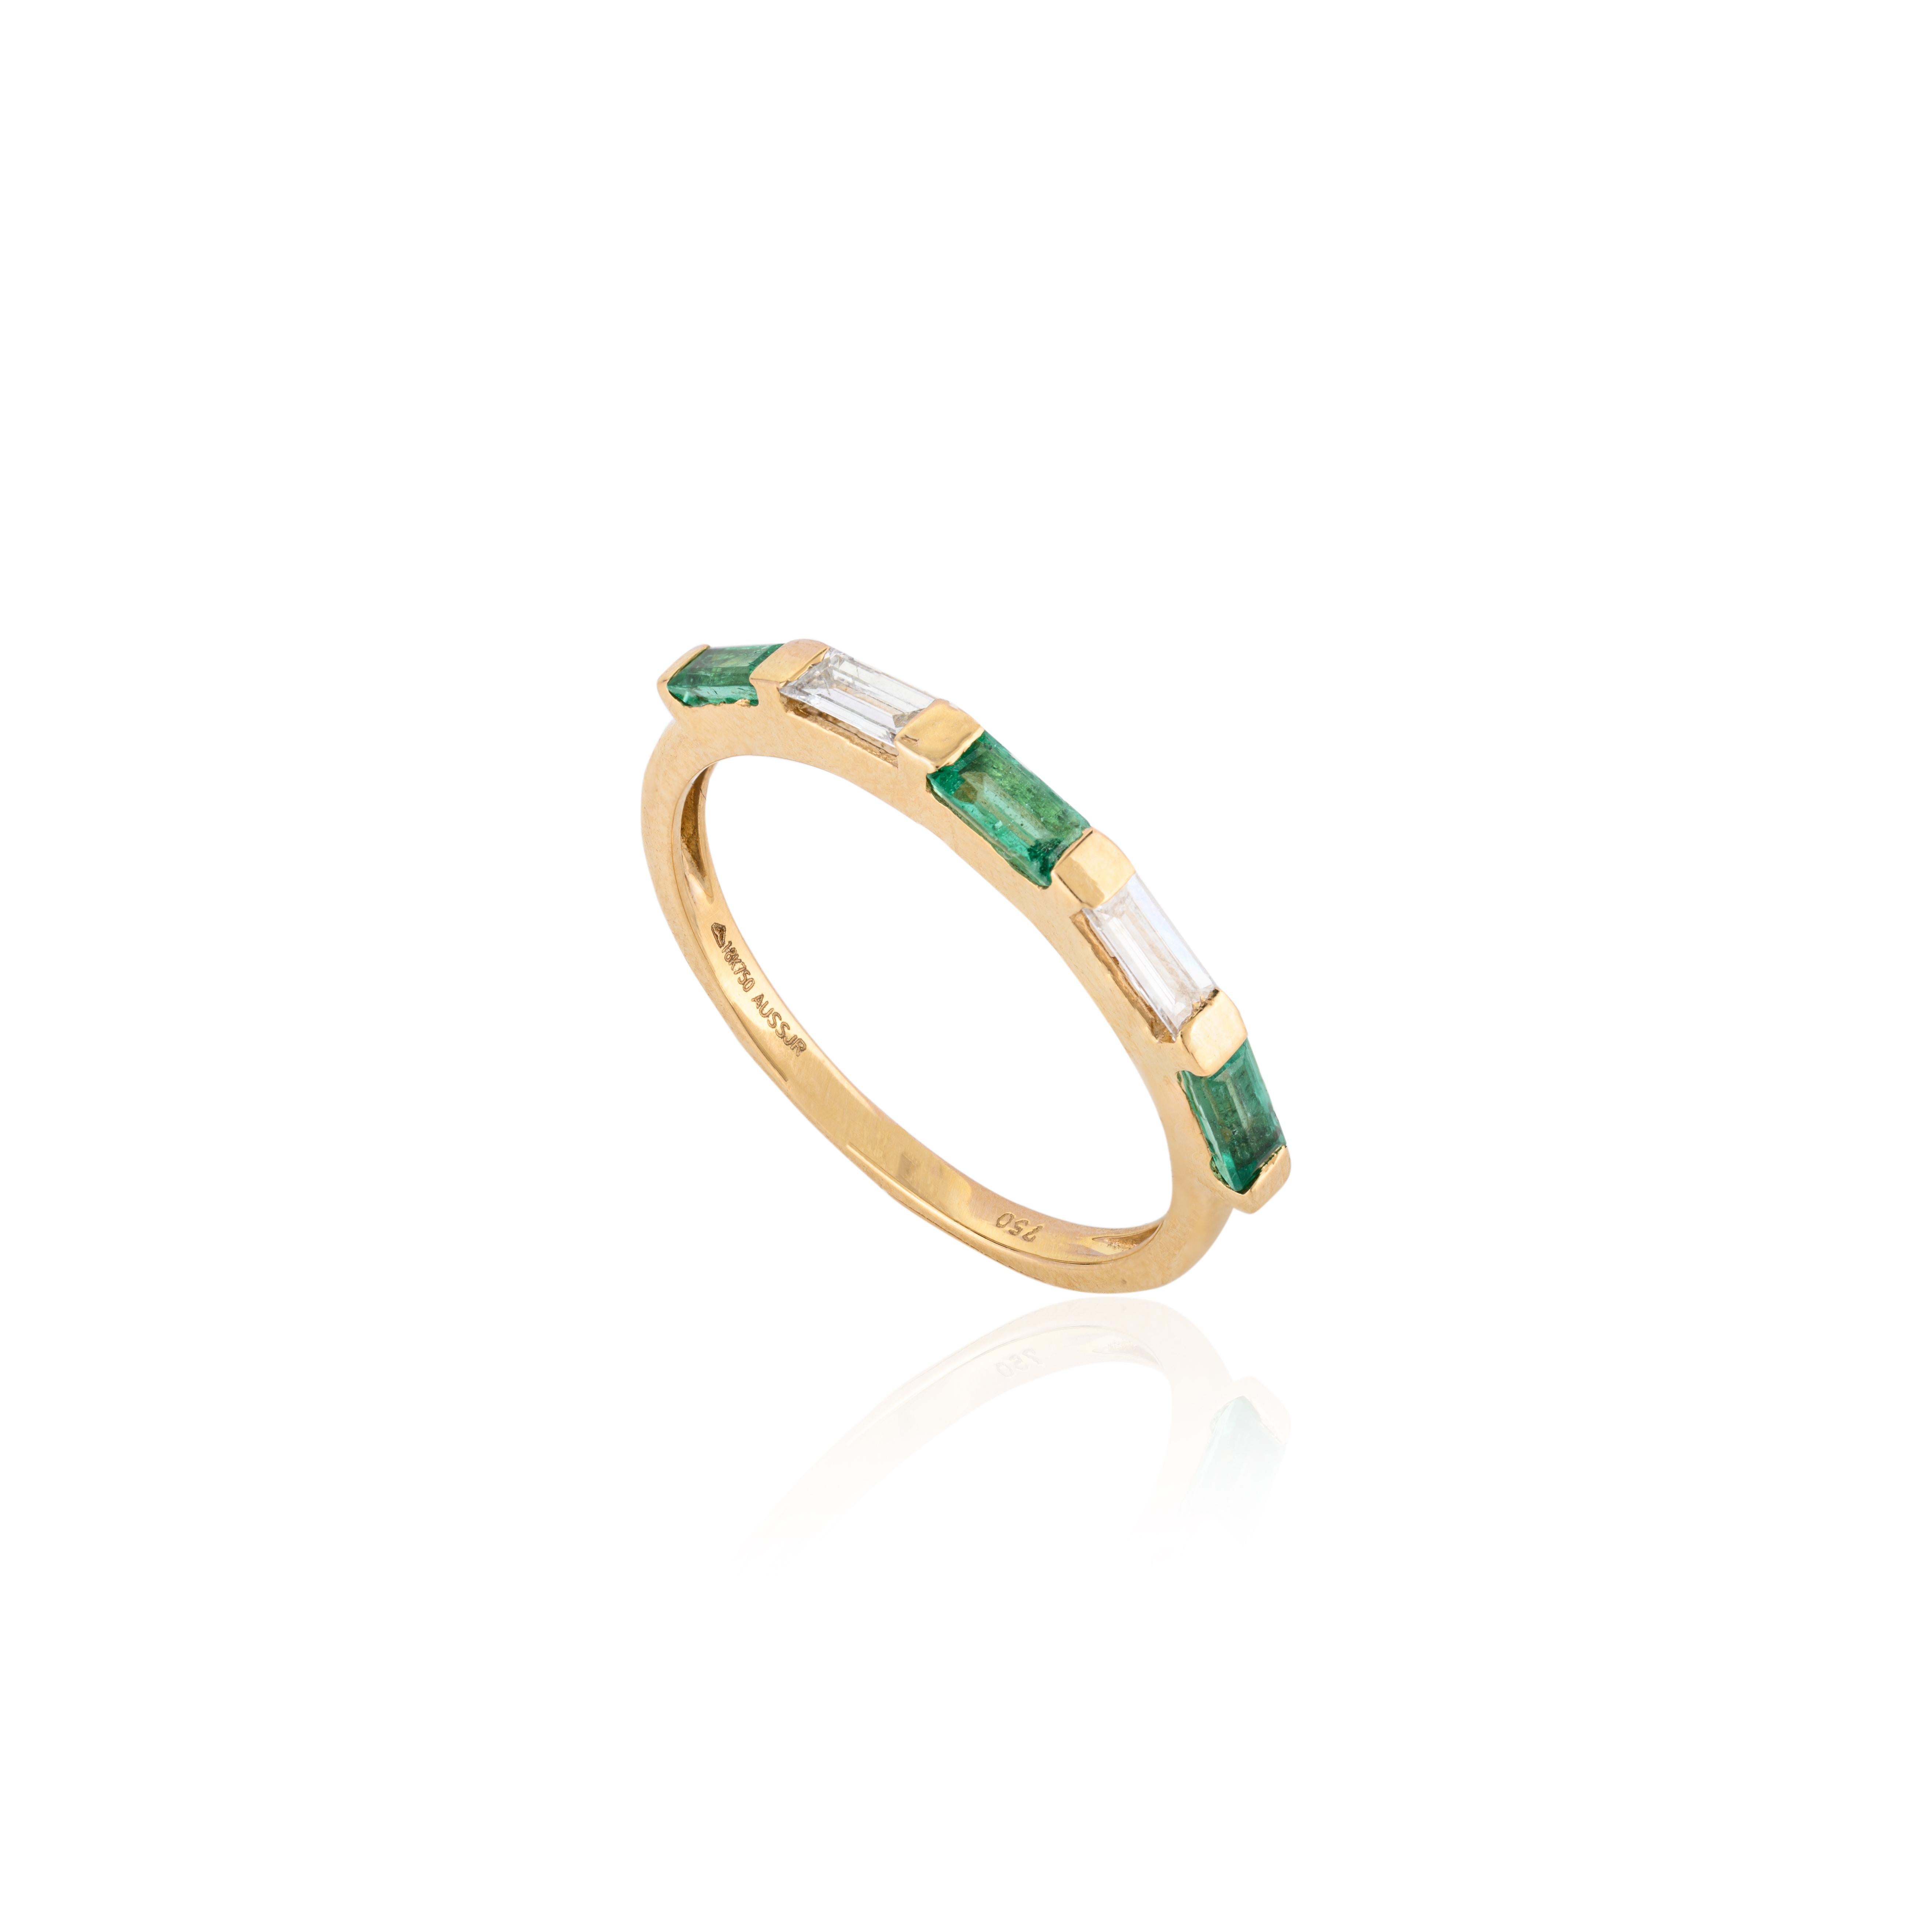 For Sale:  Alternate Baguette Emerald Diamond Stackable Band Ring in 18k Yellow Gold 4